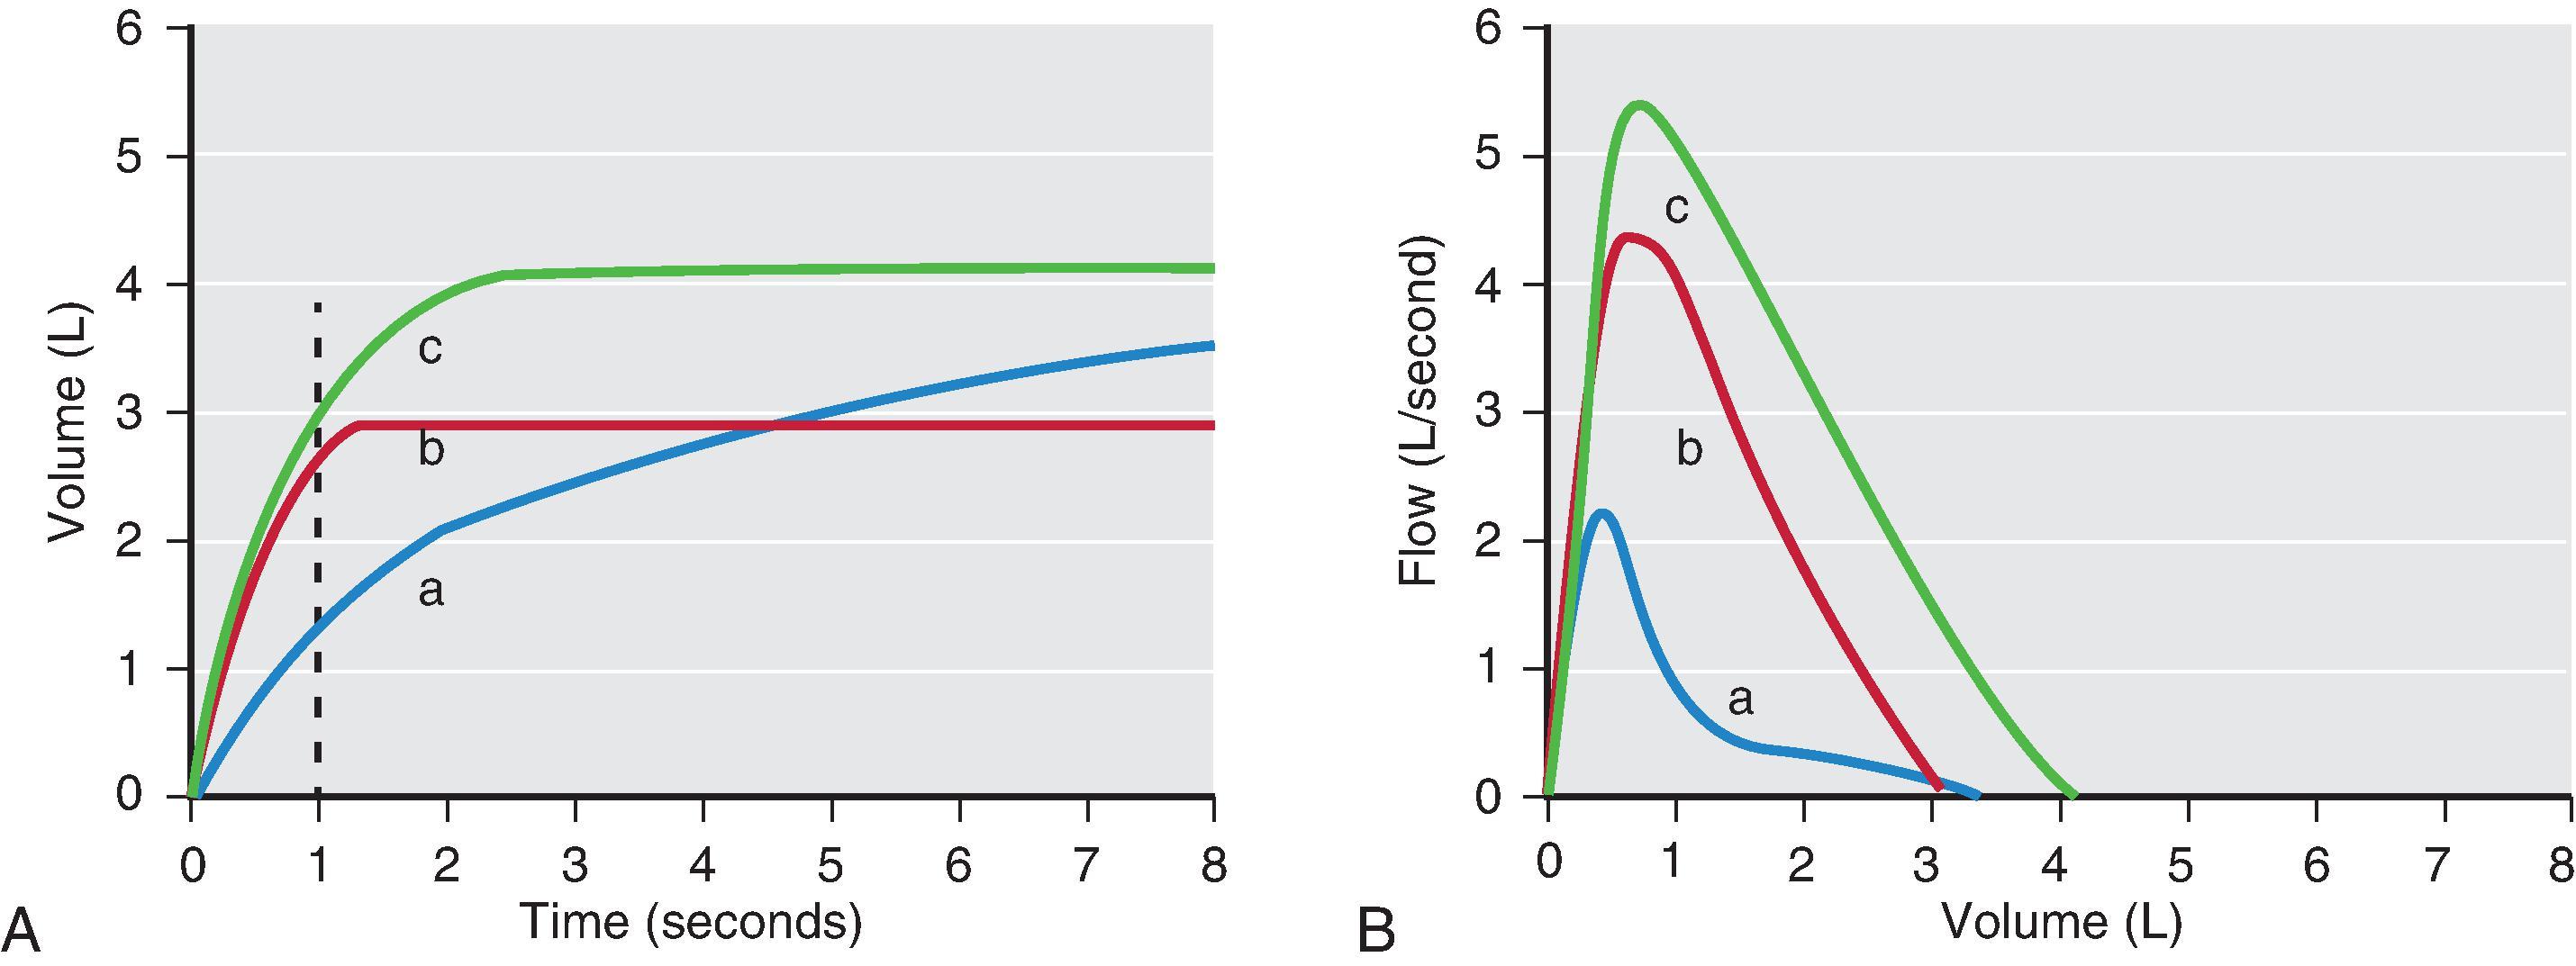 Fig. 27.1, Simple spirometry patterns in obstructive lung disease (a) , restrictive lung disease (b) , and normal patients (c) . (A) Volume–time curves. The exhaled volume during the first second of a maximal expiratory effort is the forced expiratory volume in 1 second (FEV 1 ). The maximal expired volume is the forced vital capacity (FVC). (B) Flow–volume curves. The maximal flow during a forced expiration is the peak expiratory flow (PEF). (From Patterson GA, Cooper JD, Deslauriers J, et al., eds. Pearson’s Thoracic and Esophageal Surgery. 3rd ed. Philadelphia: Elsevier; 2008, used with permission.)